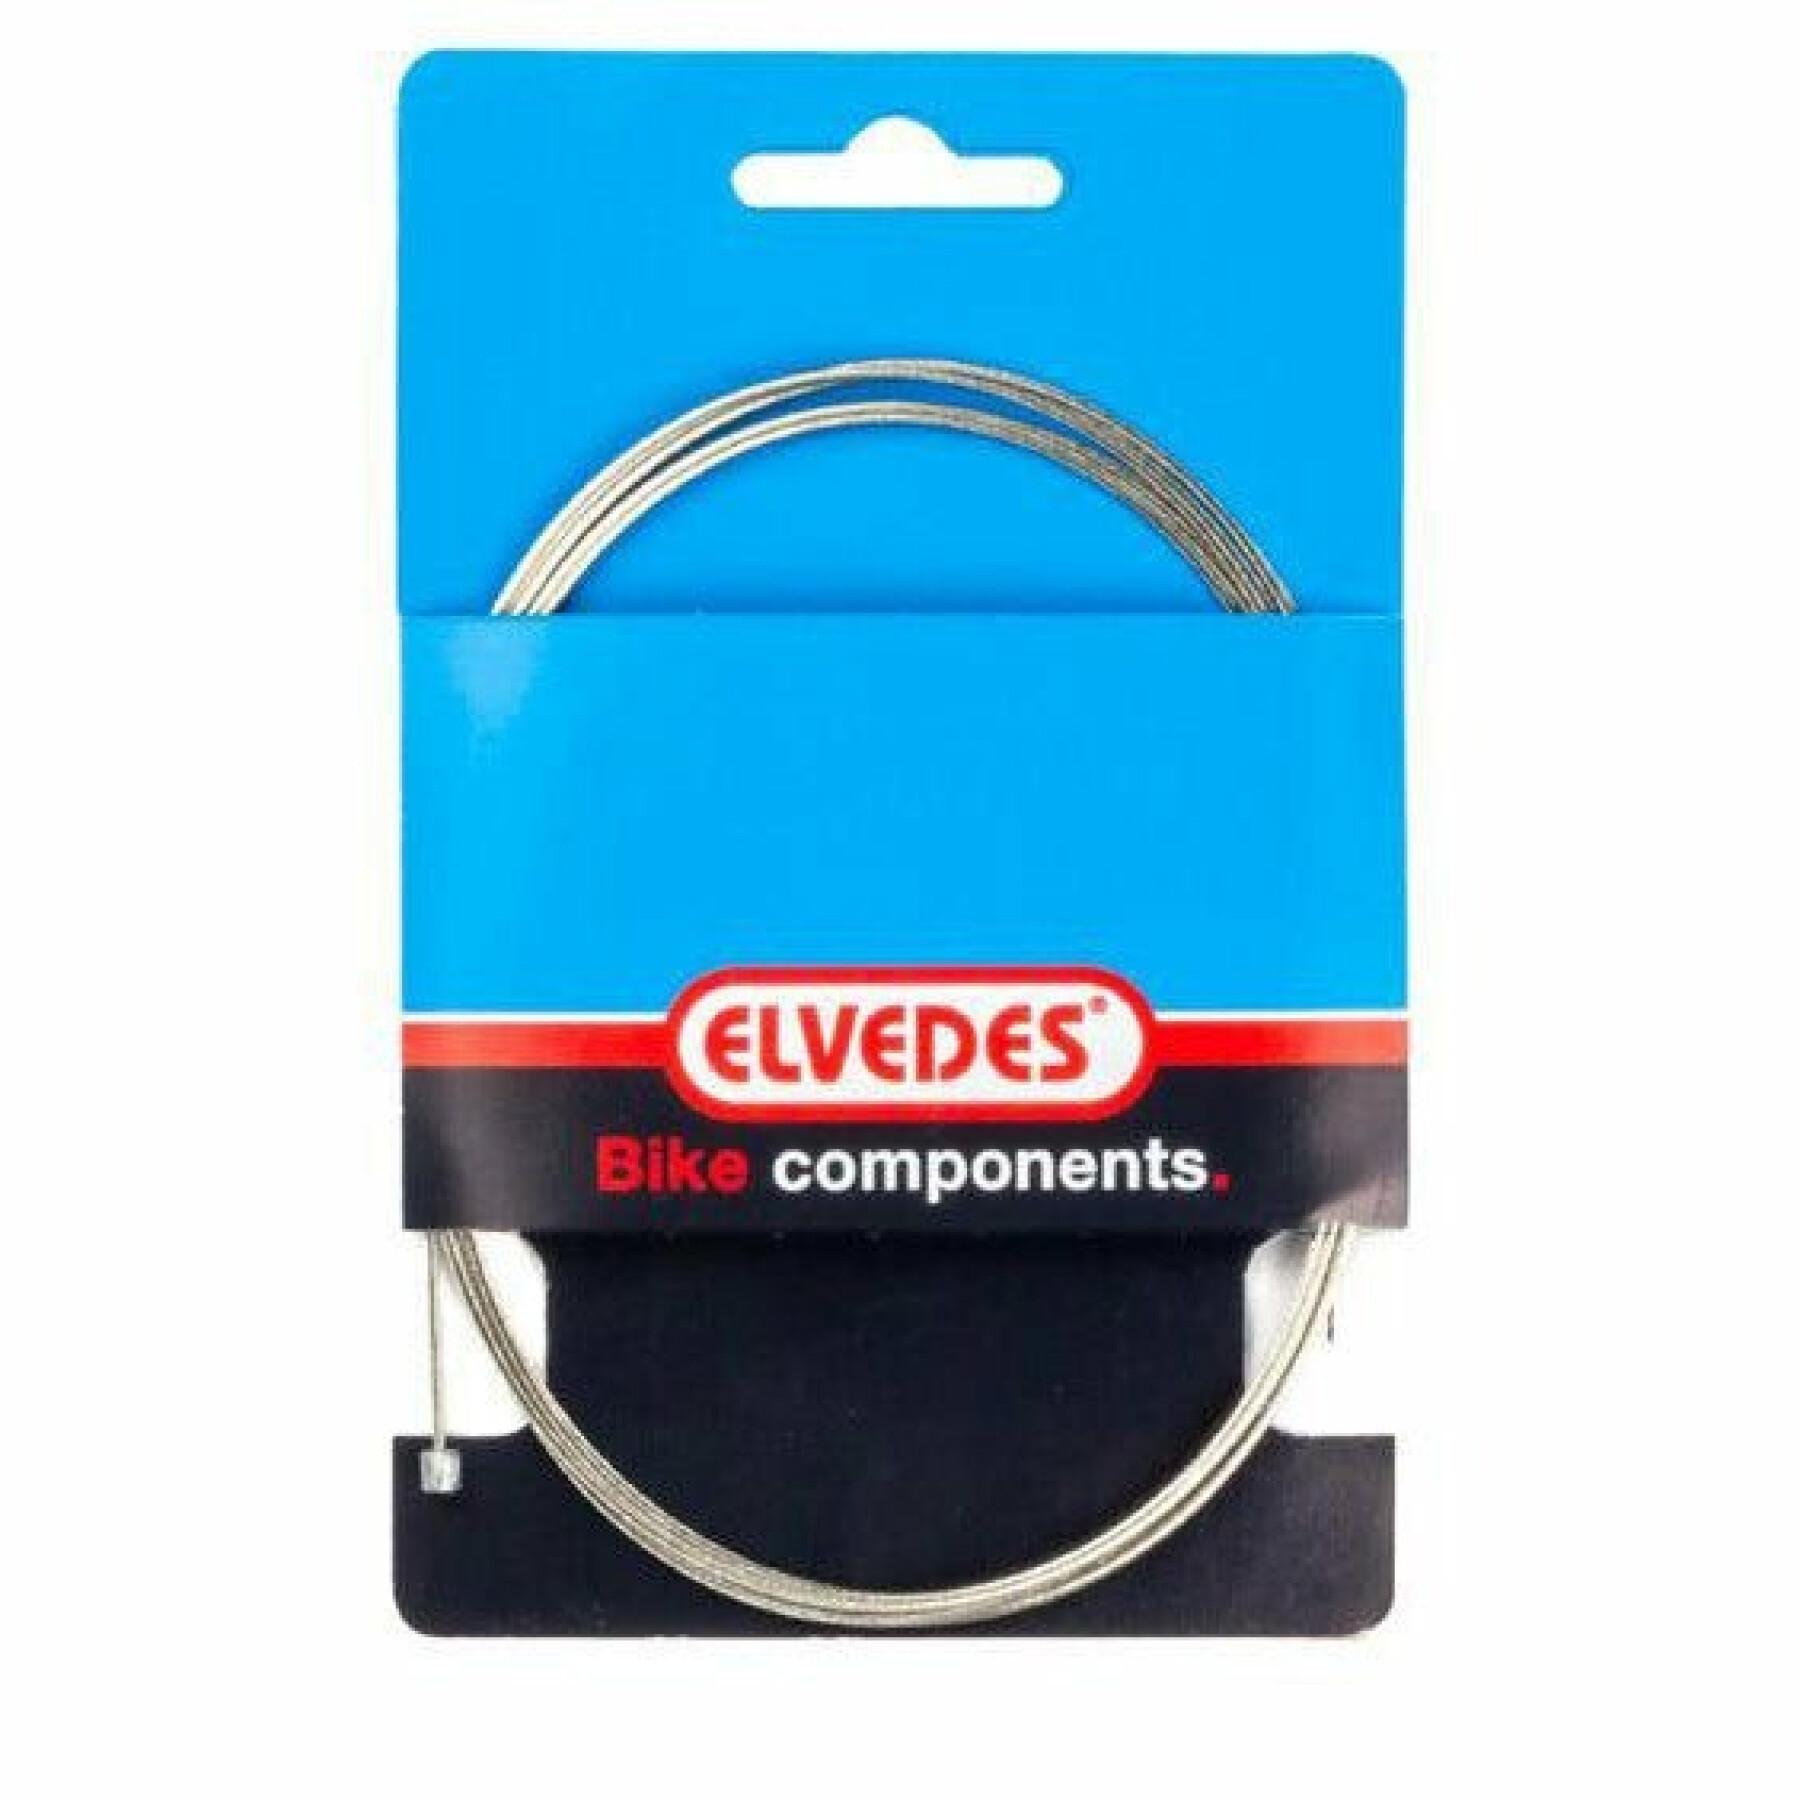 Stainless steel gearshift cable Elvedes Wires Slick